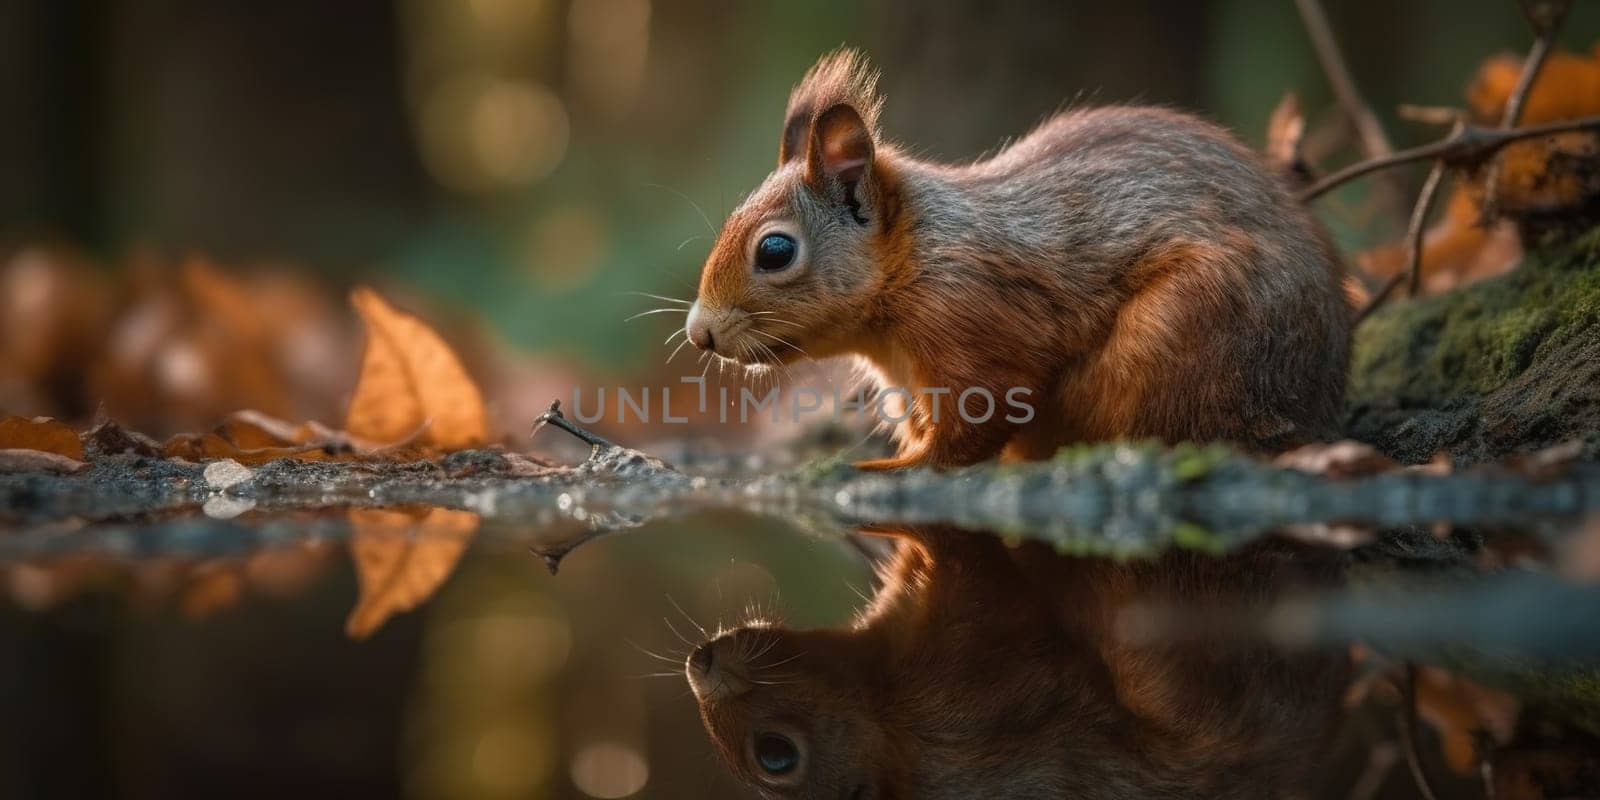 Cute Red Wild Squirrel Looking At Water Reflection In The Puddle In Forest by tan4ikk1